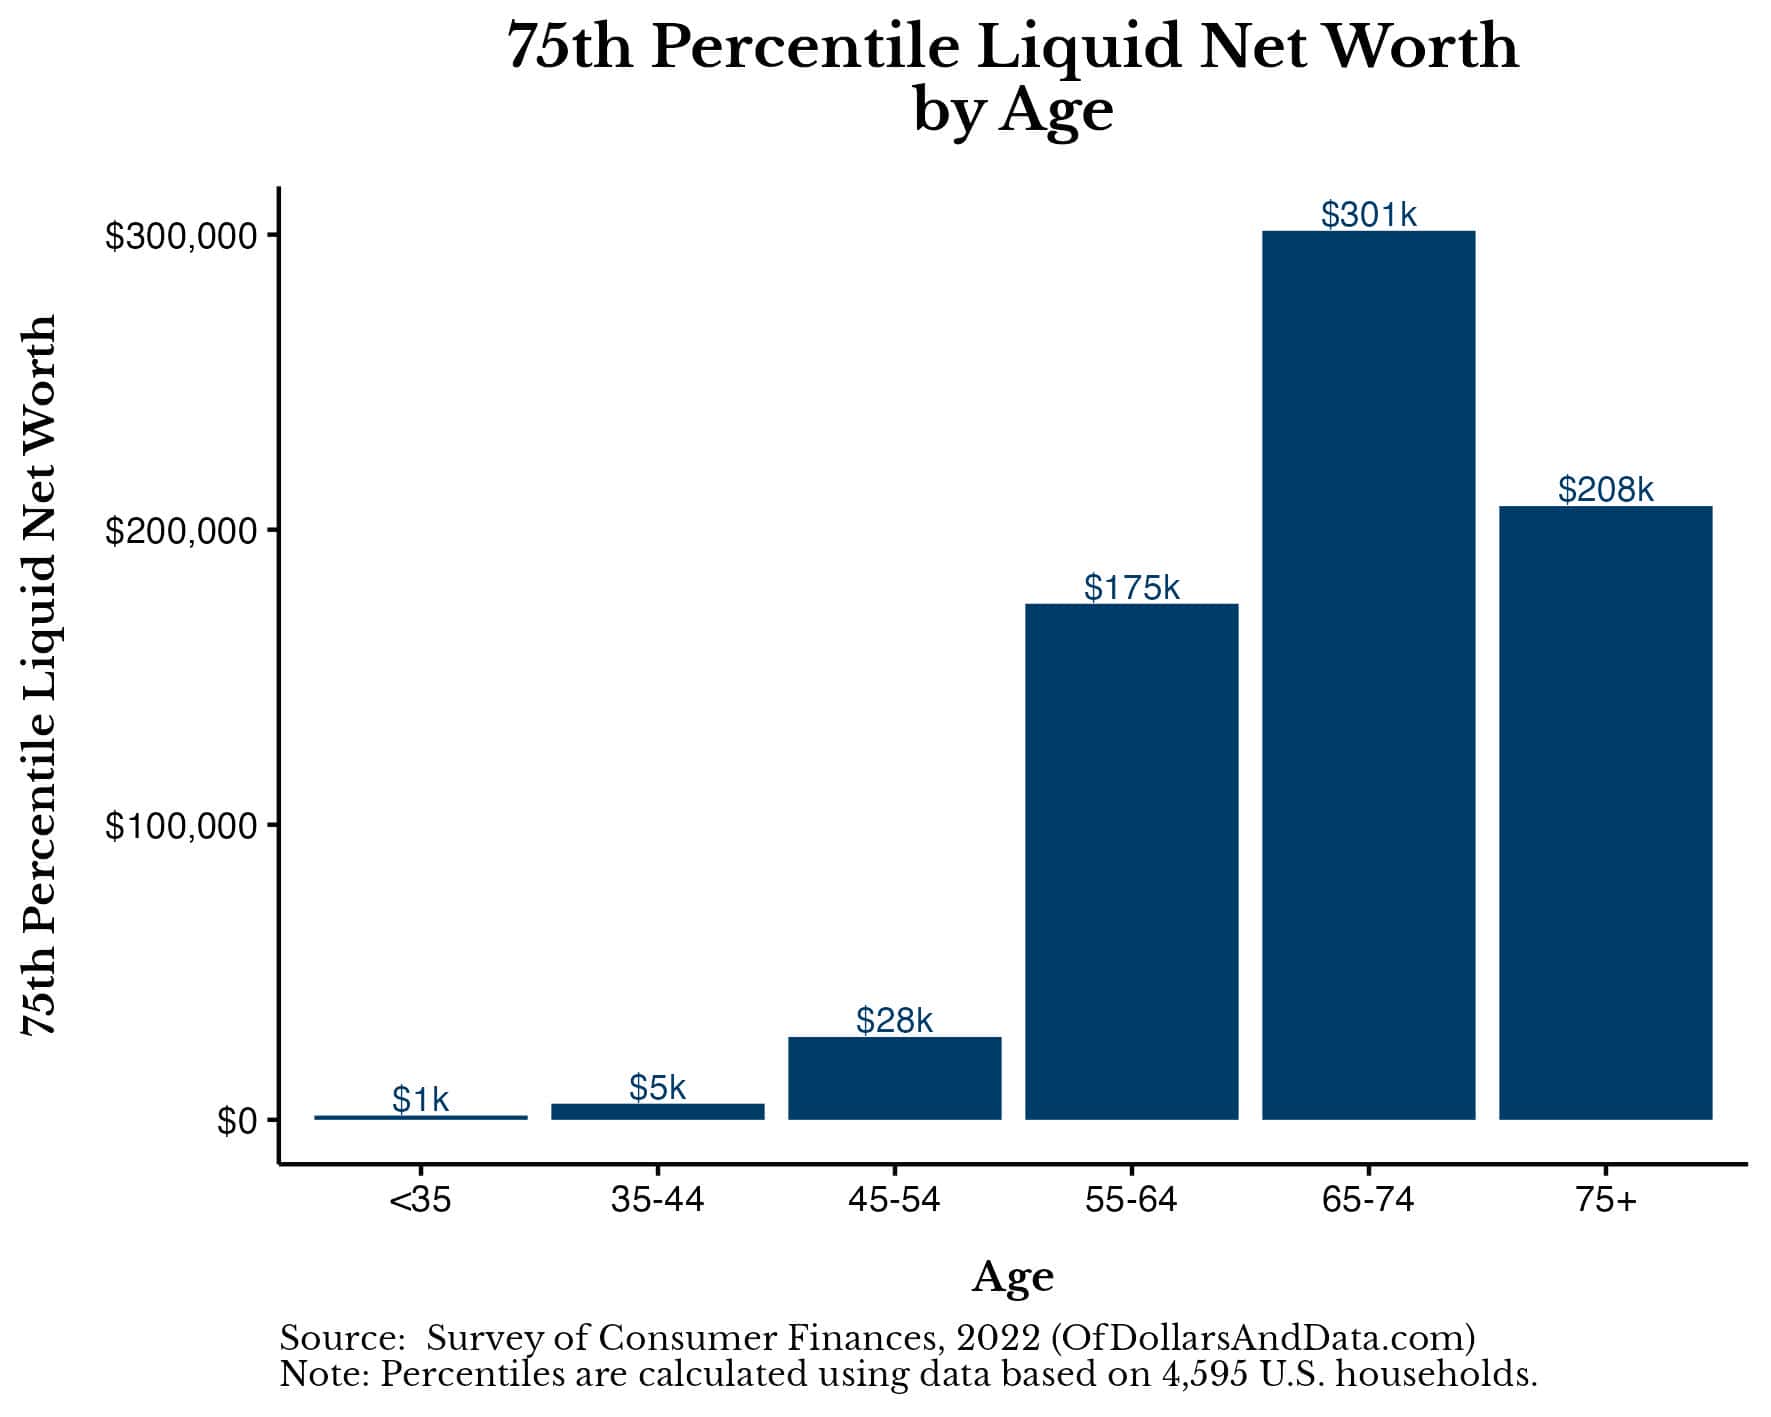 Chart showing 75th percentile liquid net worth by age.